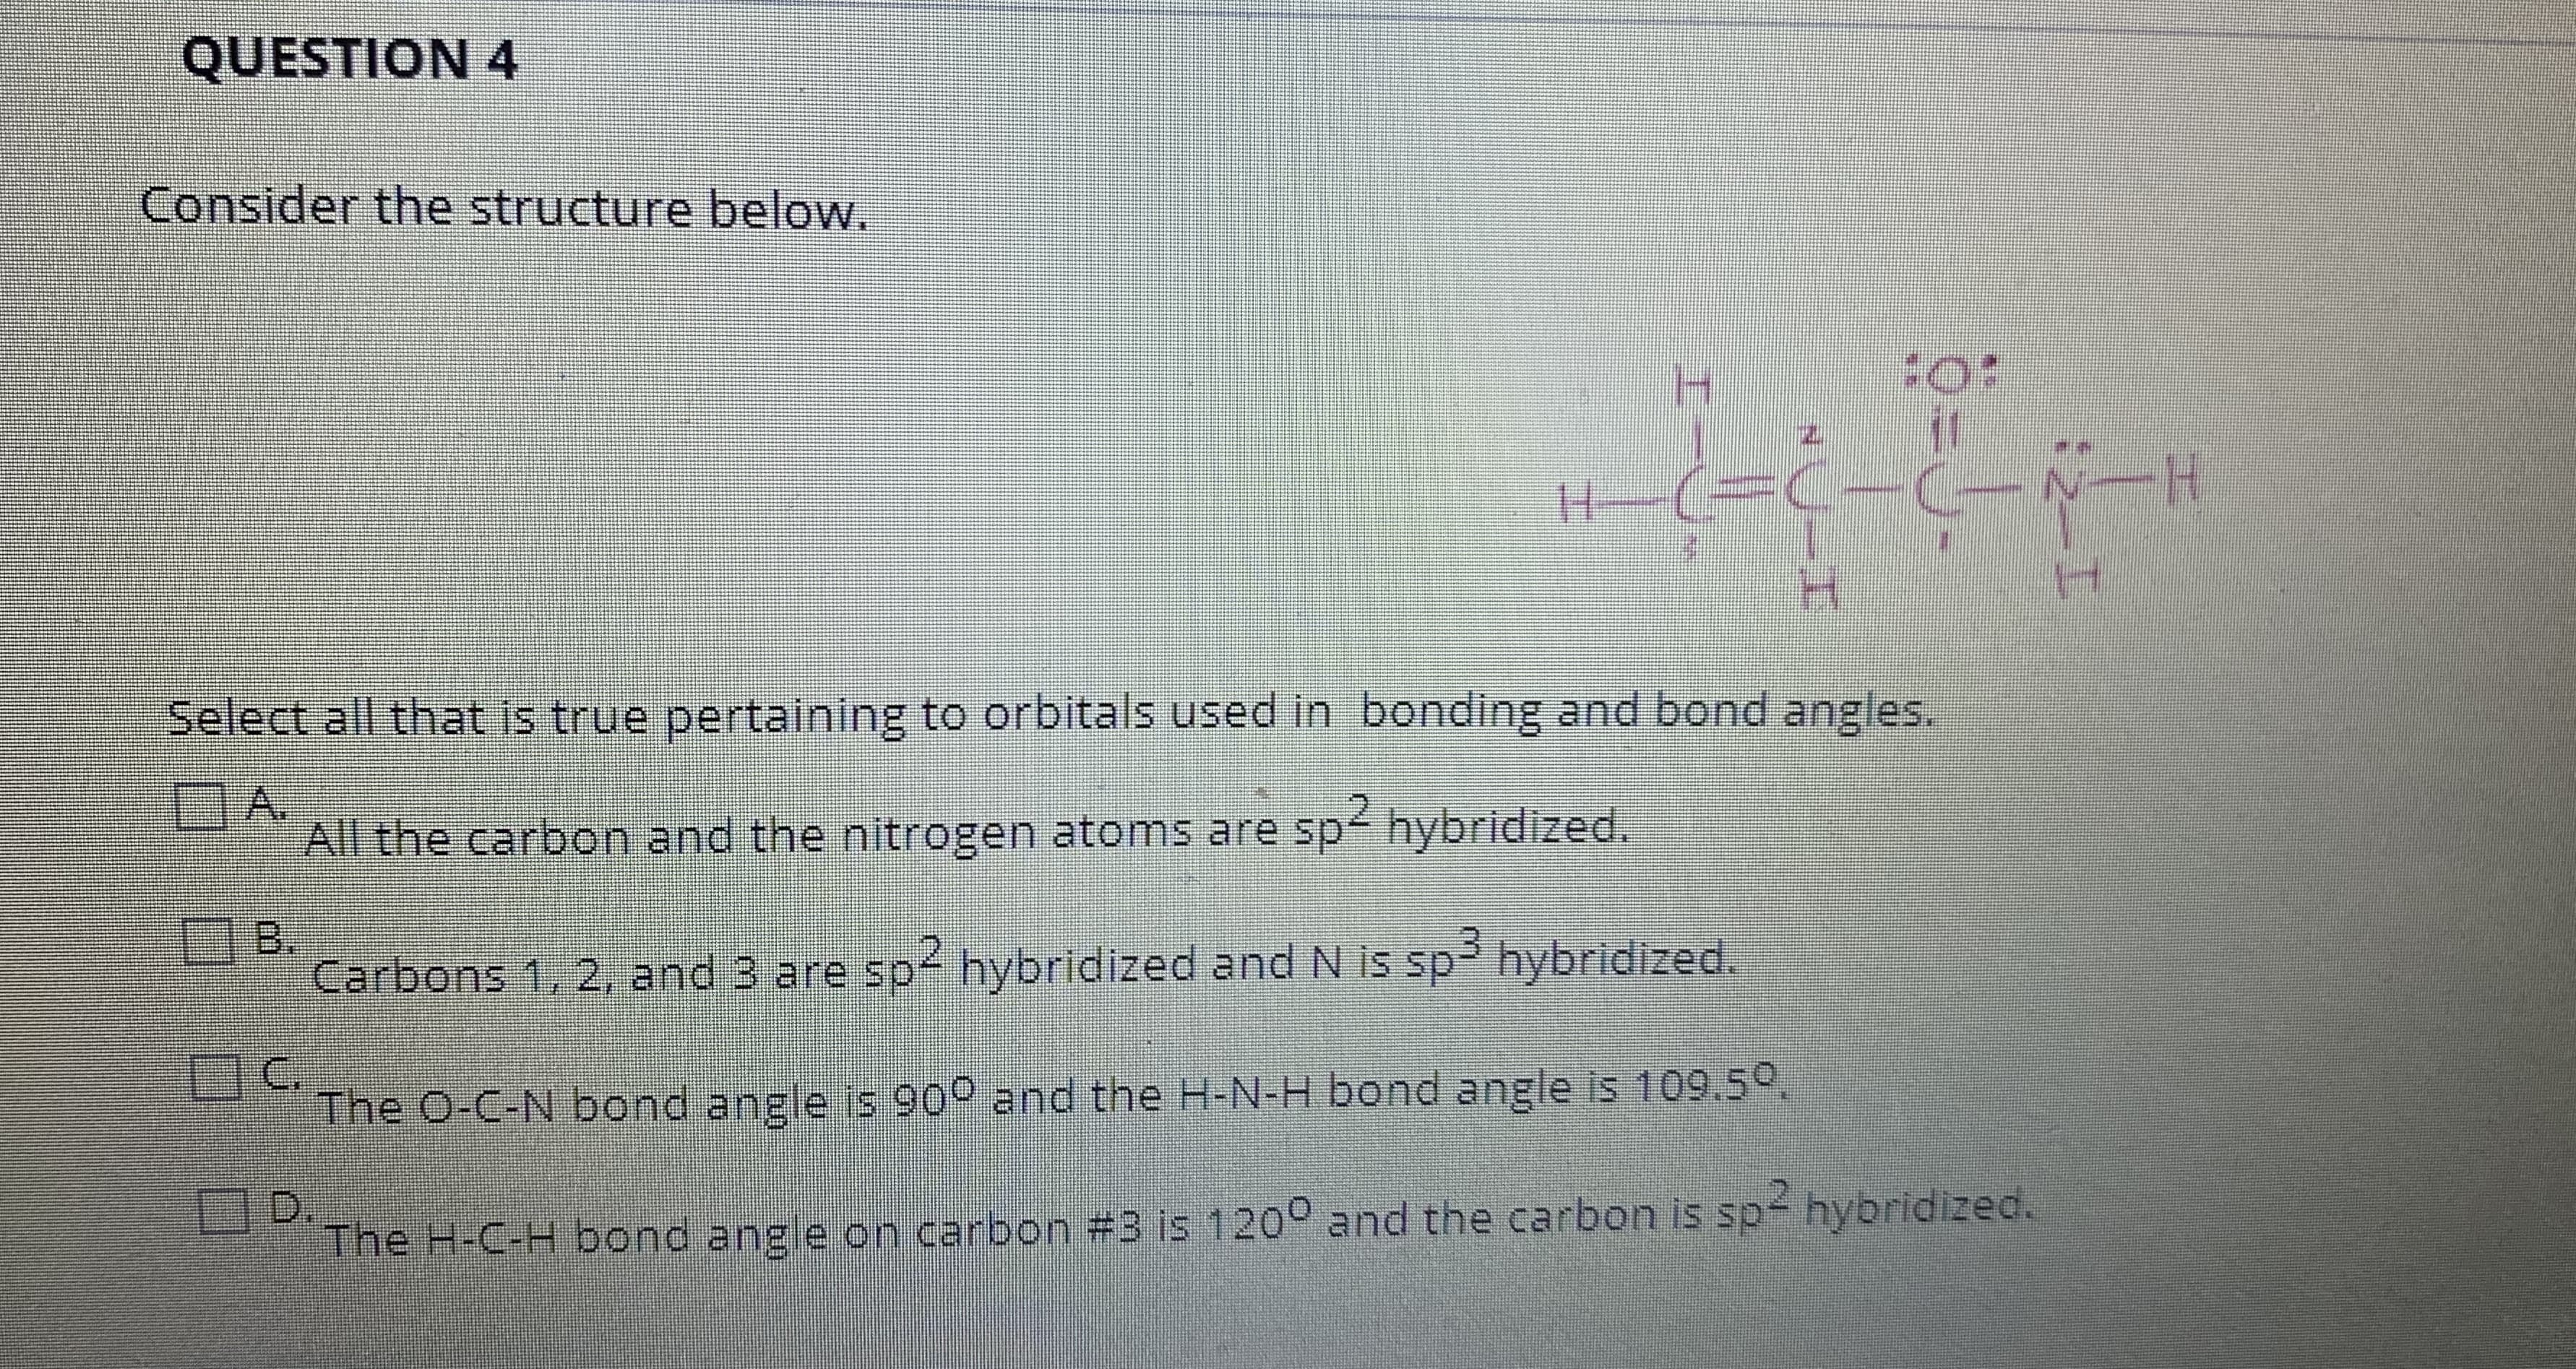 Select all that is true pertaining to orbitals used in bonding and bond angles.
A.
All the carbon and the nitrogen atoms are sp hybridized.
B.
Carbons 1, 2, and 3 are sp hybridized and N is sp hybridized.
